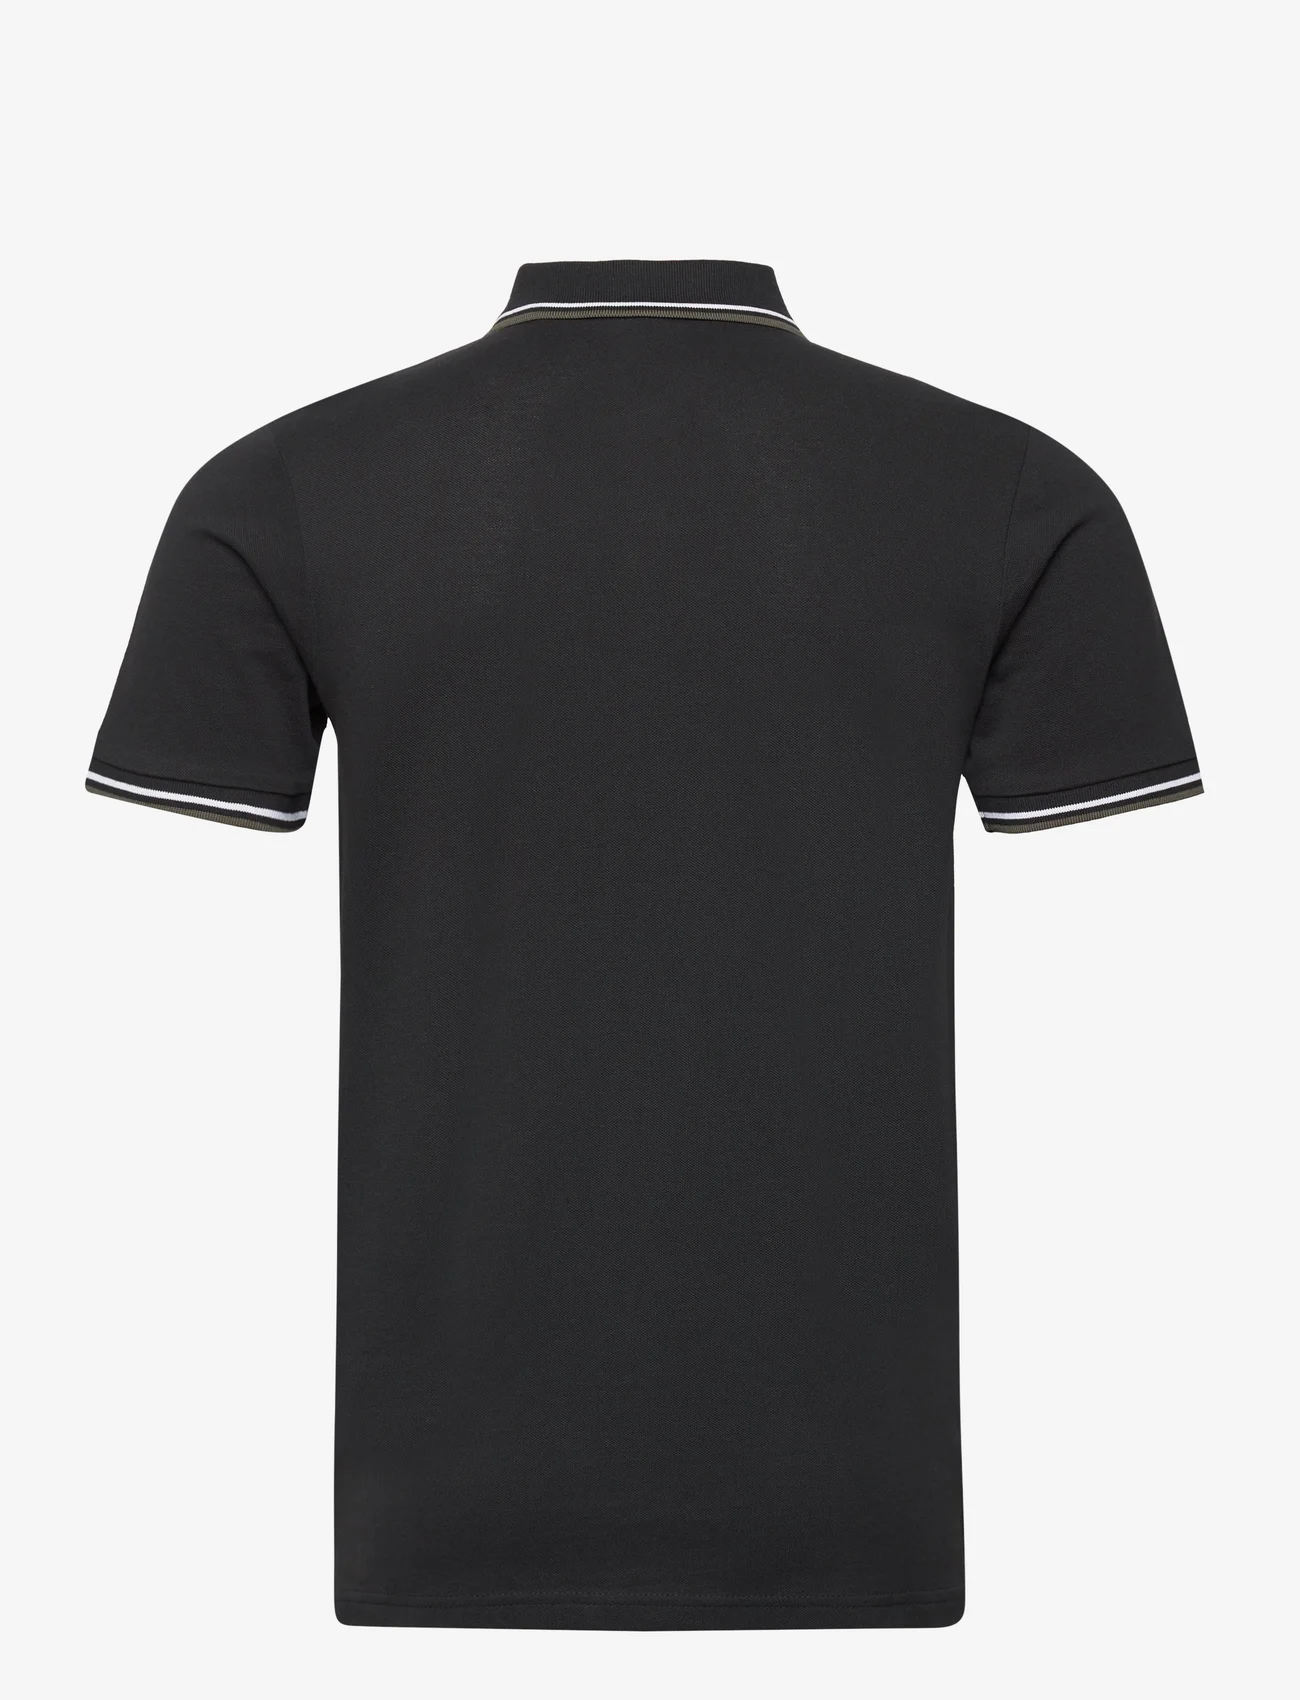 Lindbergh - Polo shirt with contrast piping - short-sleeved polos - black 124 - 1